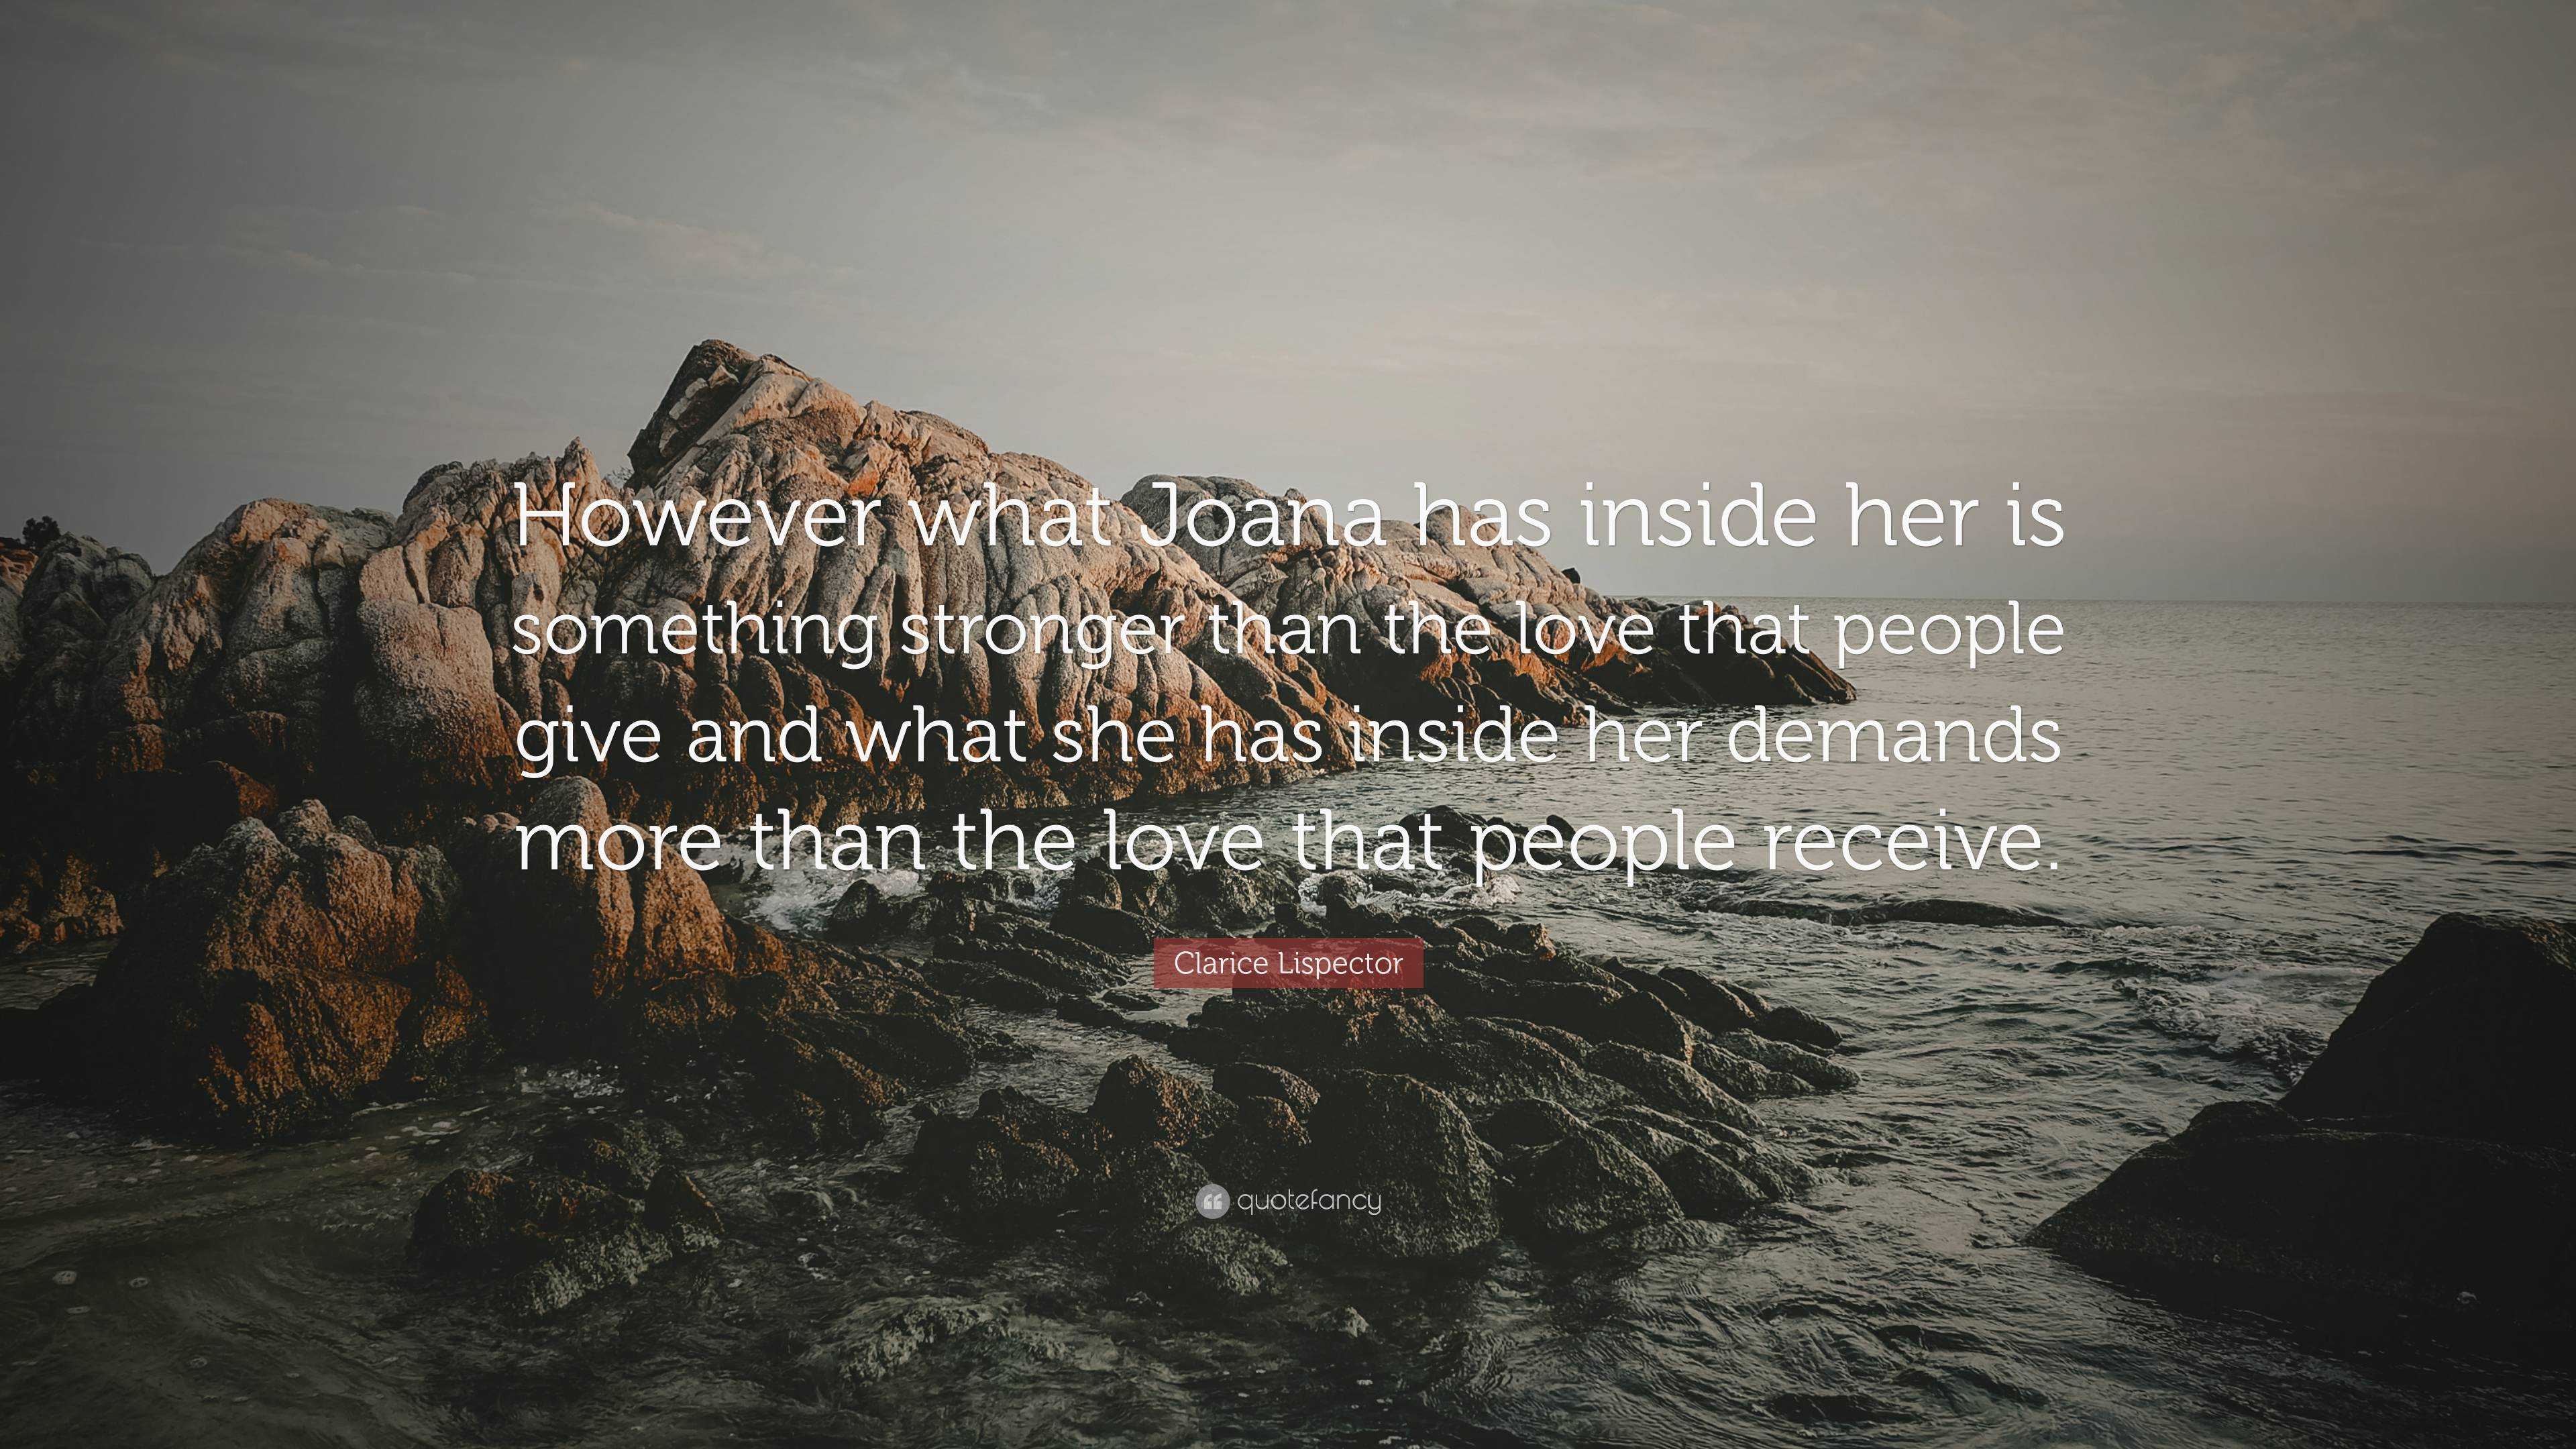 Clarice Lispector Quote: “However what Joana has inside her is ...